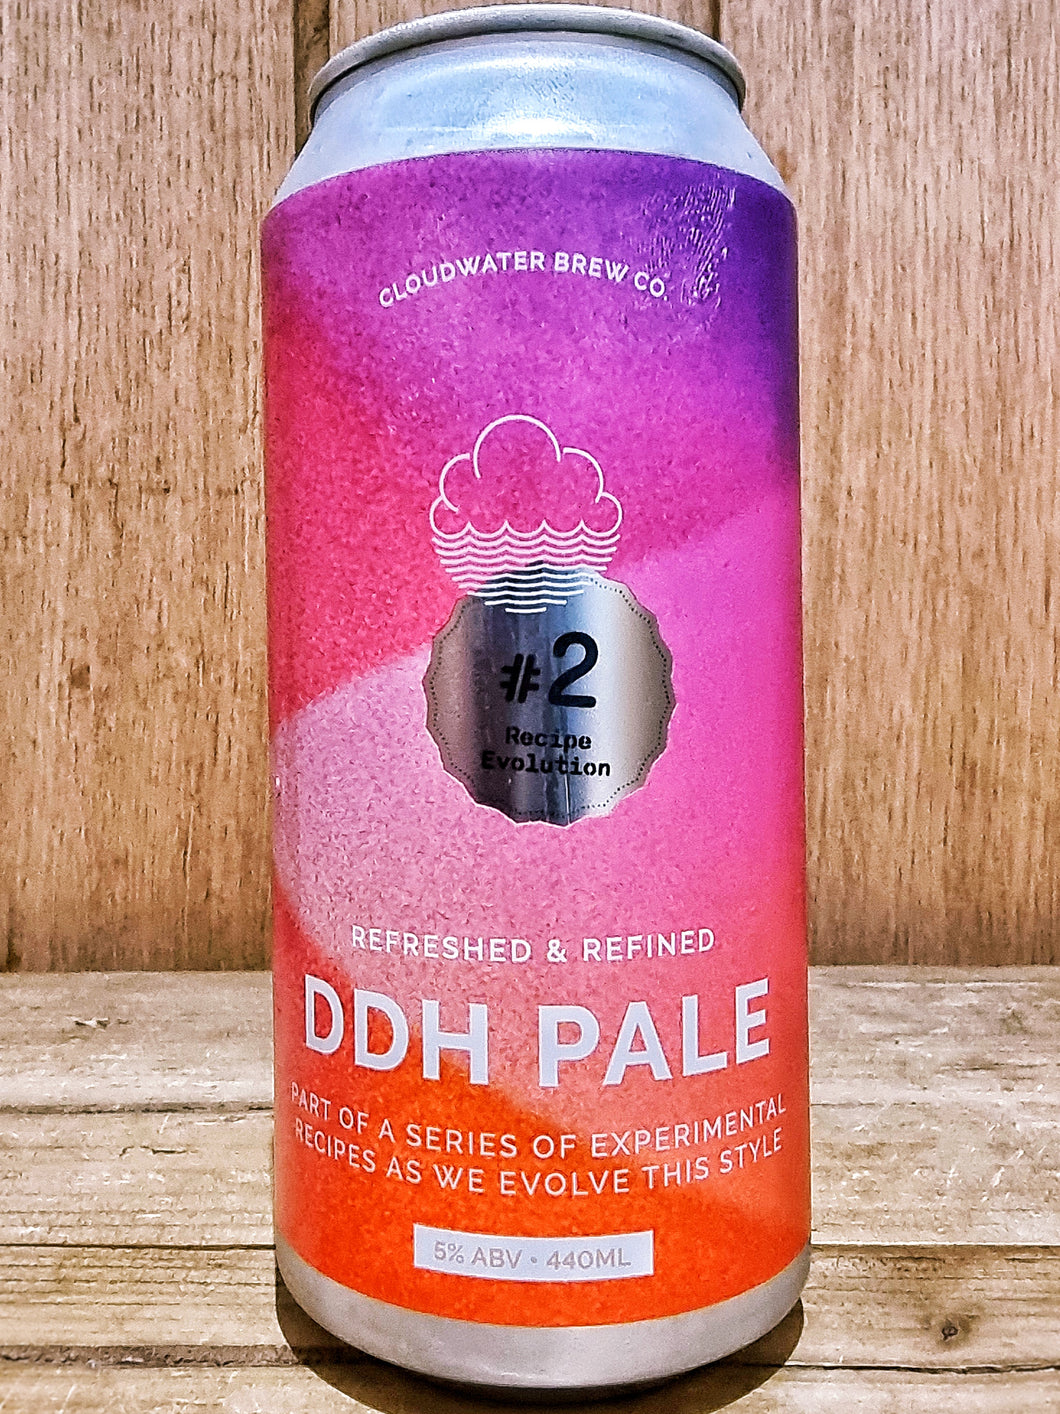 Cloudwater - DDH Pale #2